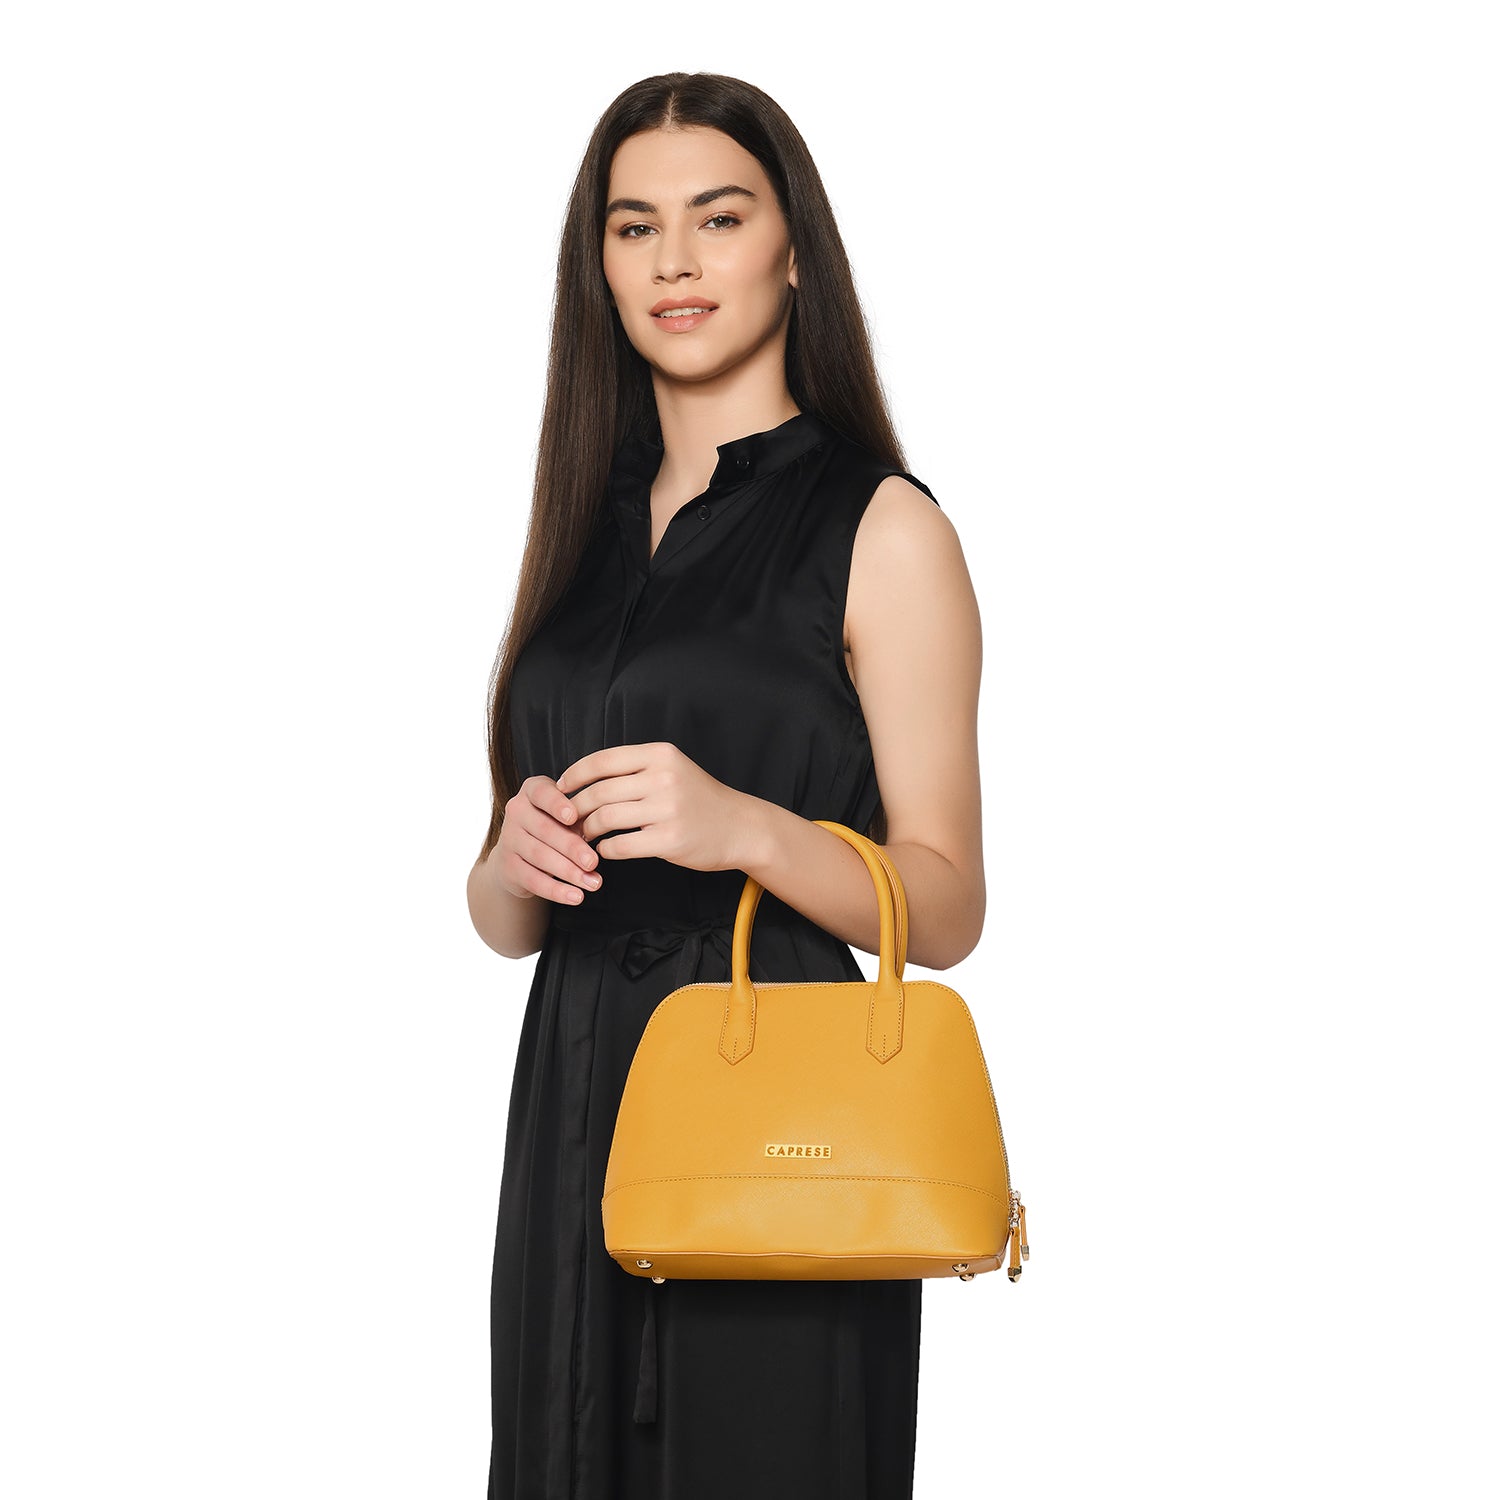 Caprese Sling Bags - Get up to 70% off Online | Myntra